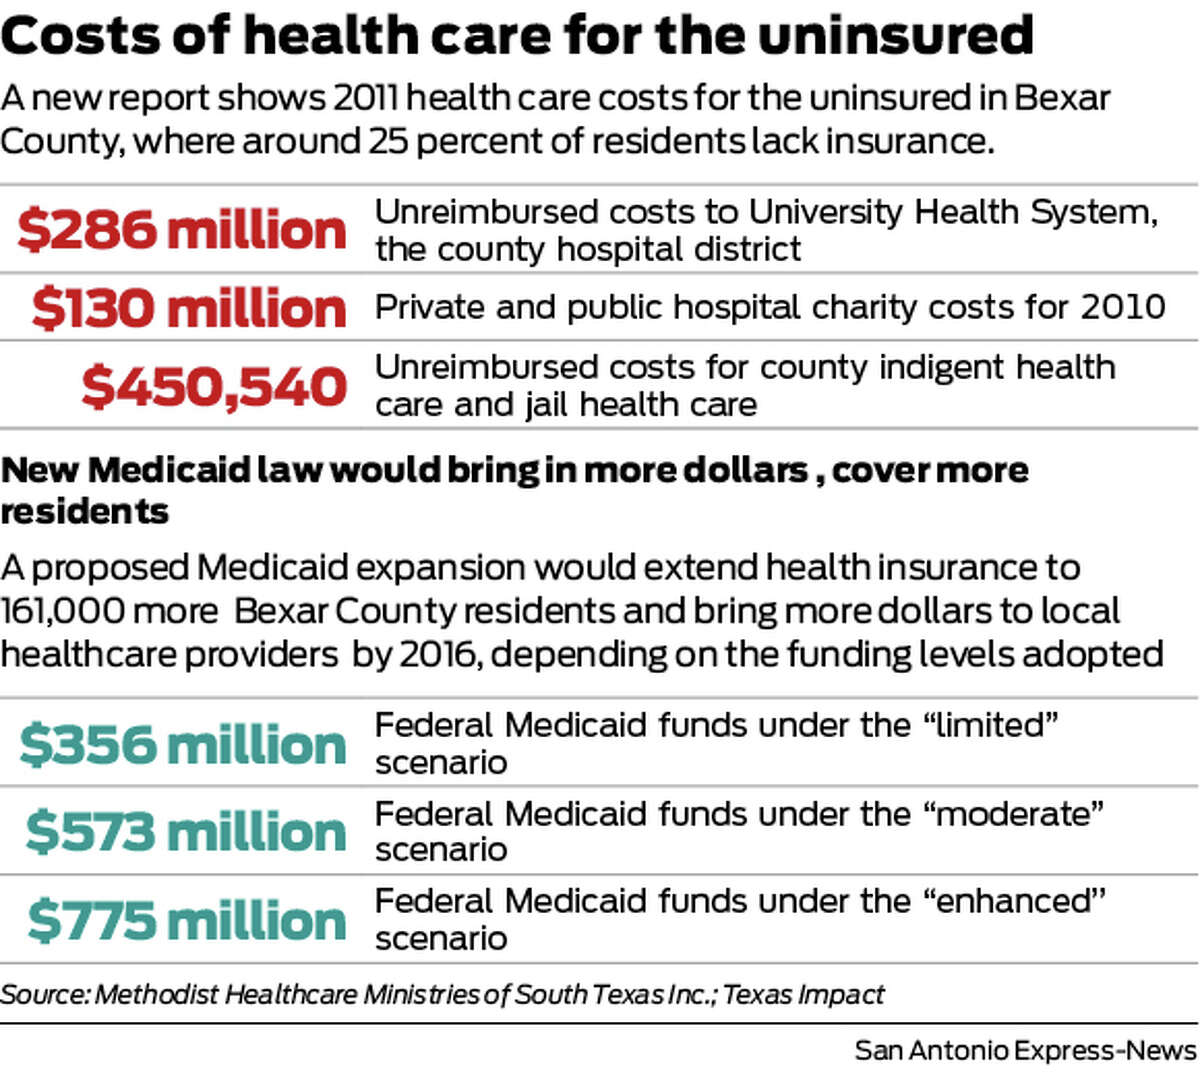 A new report shows 2011 health care costs for the uninsured in Bexar County, where around 25 percent of residents lack insurance.